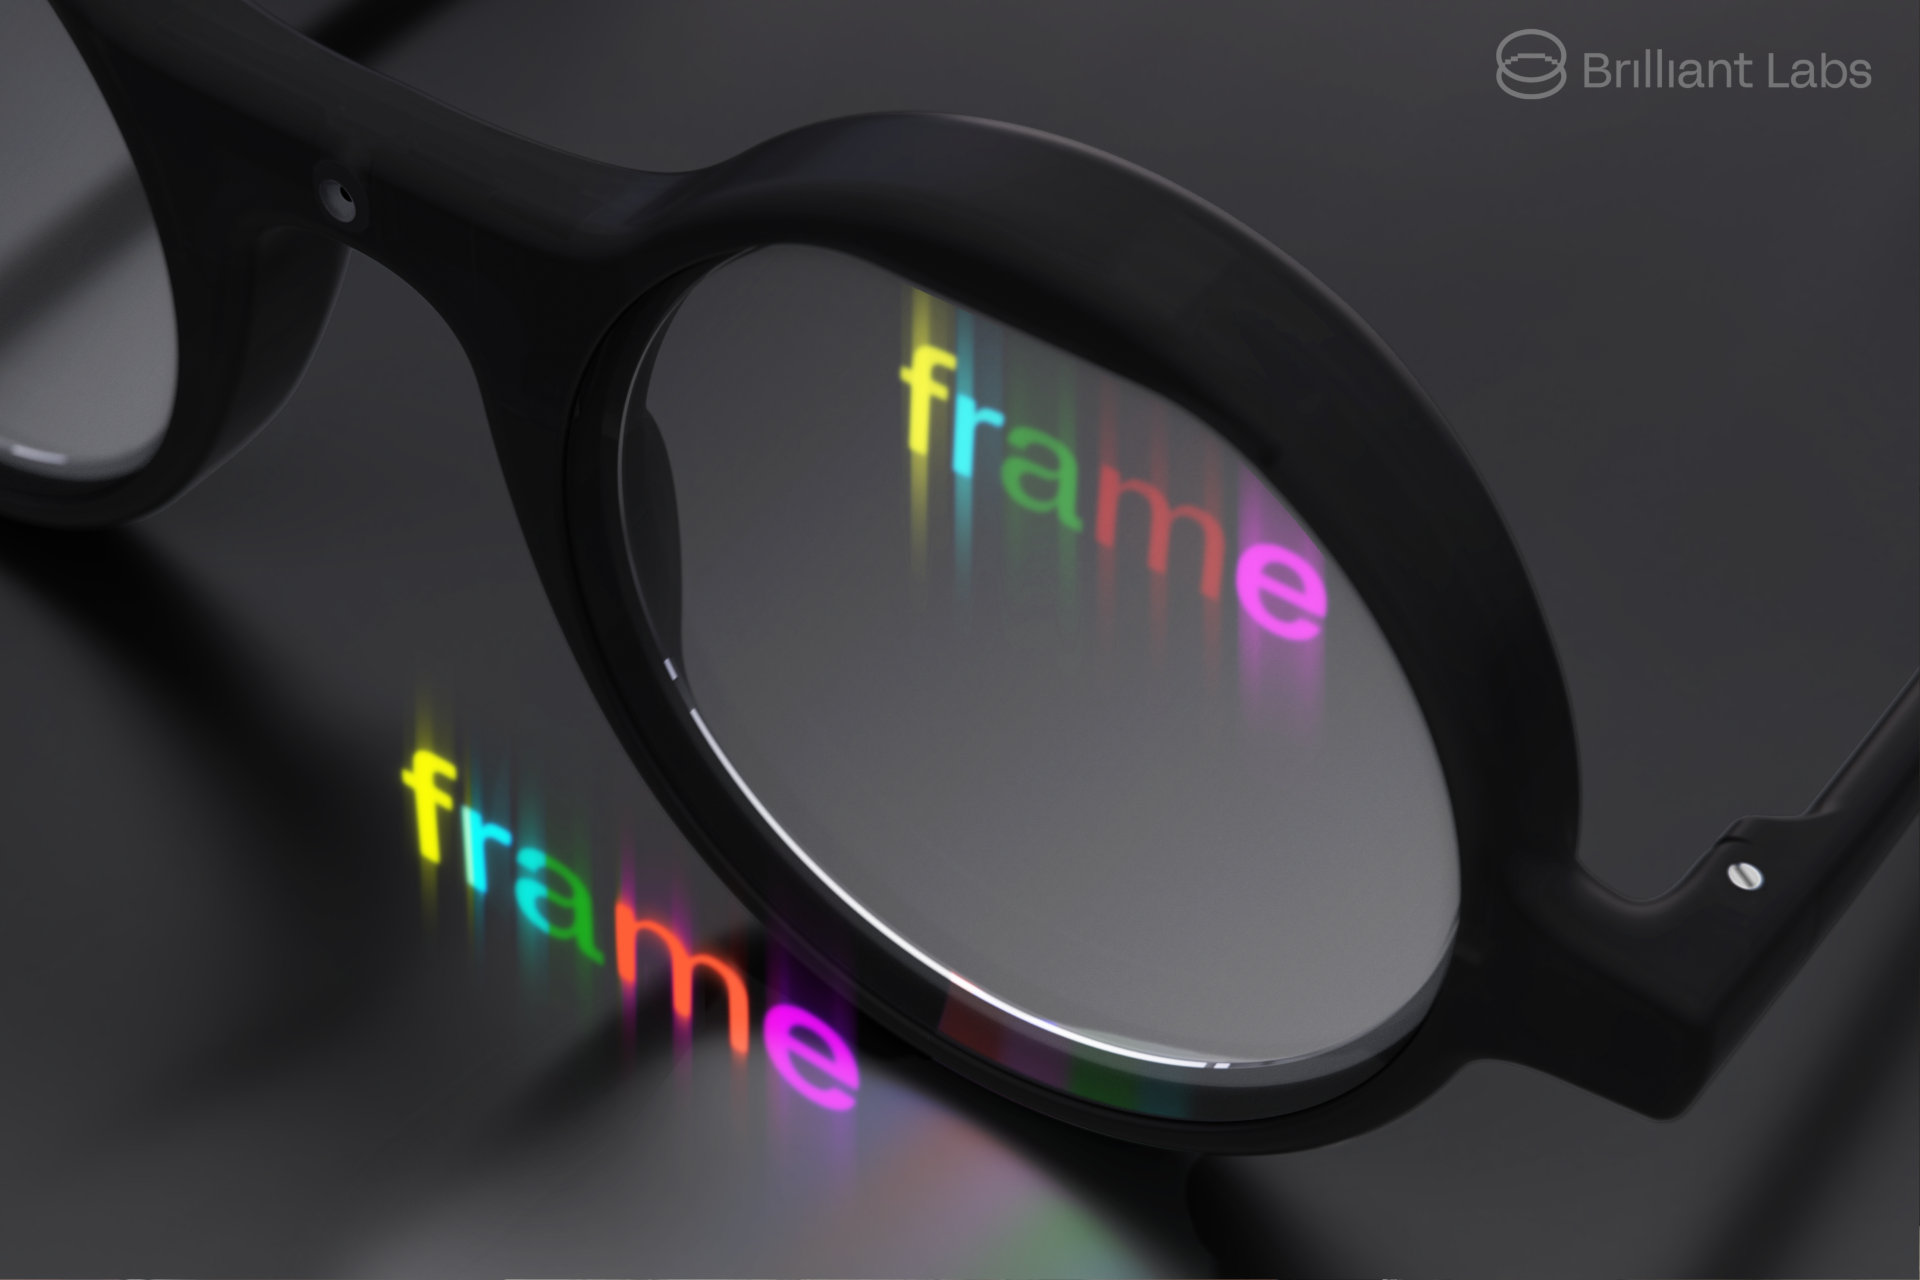 A close-up of Brilliant Labs Frame smart glasses with a simulated image on the display.